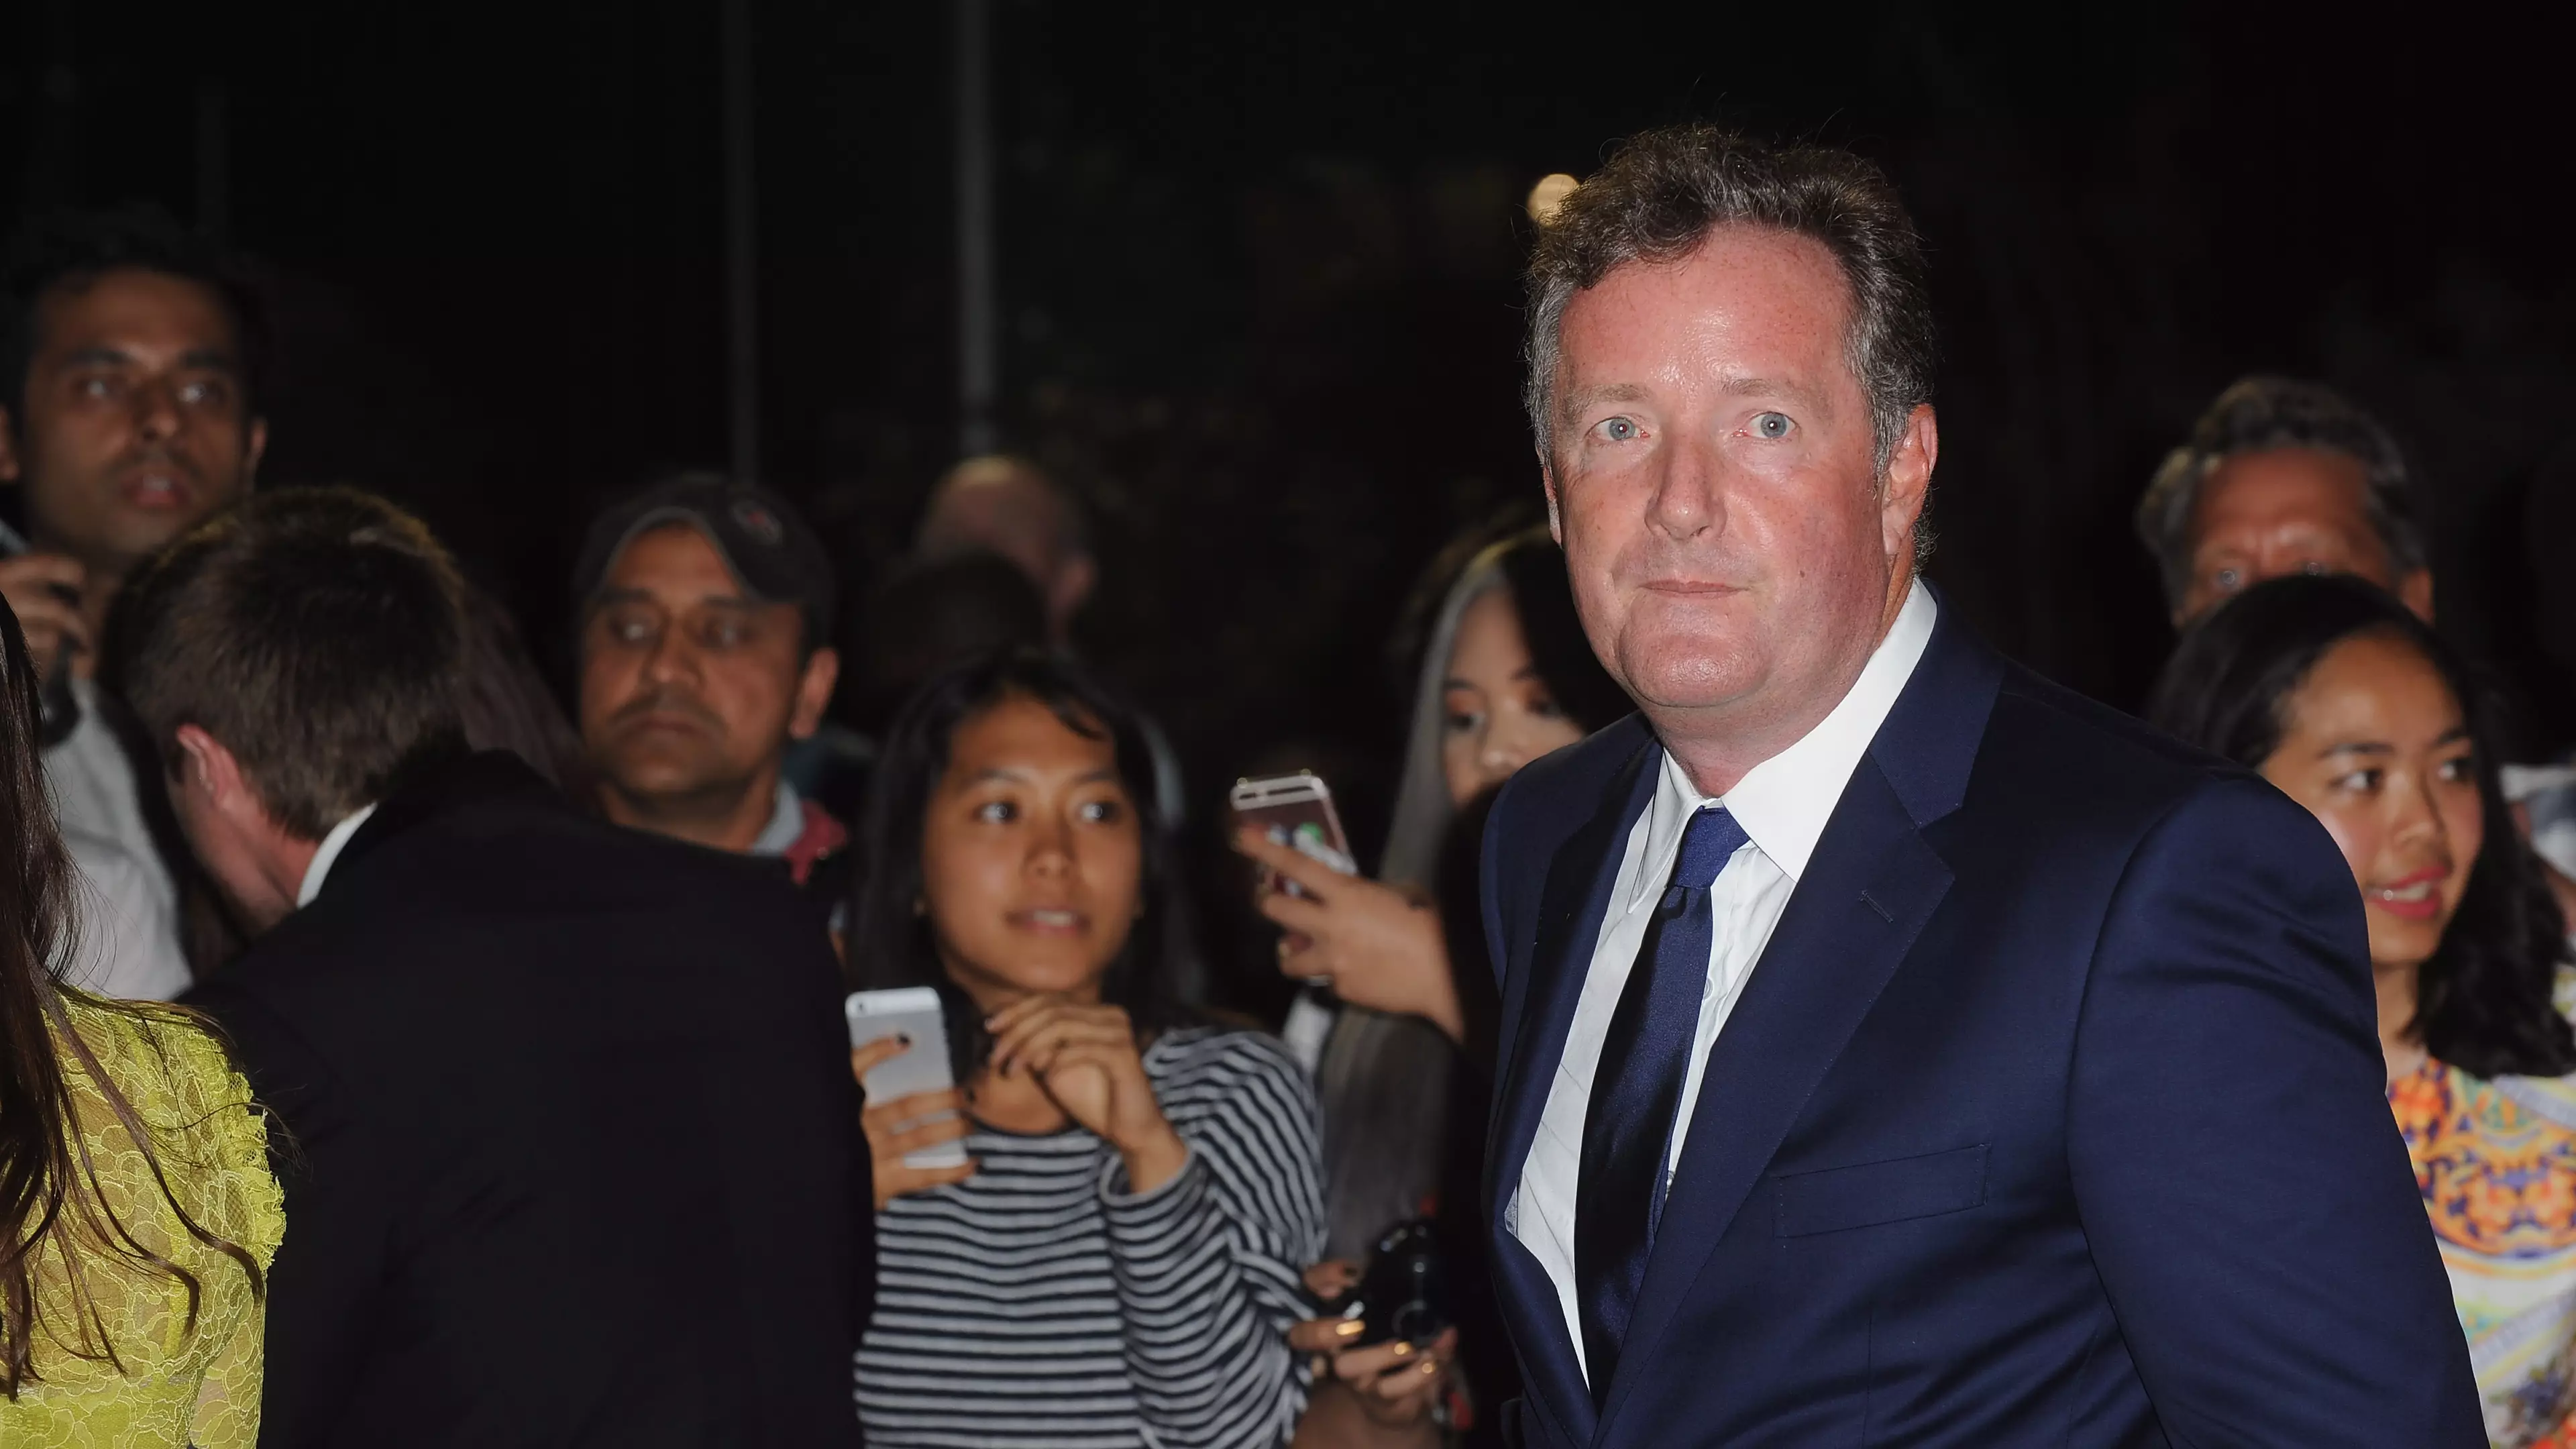 Piers Morgan Has 'Leaked' The Earnings Of Top BBC Stars